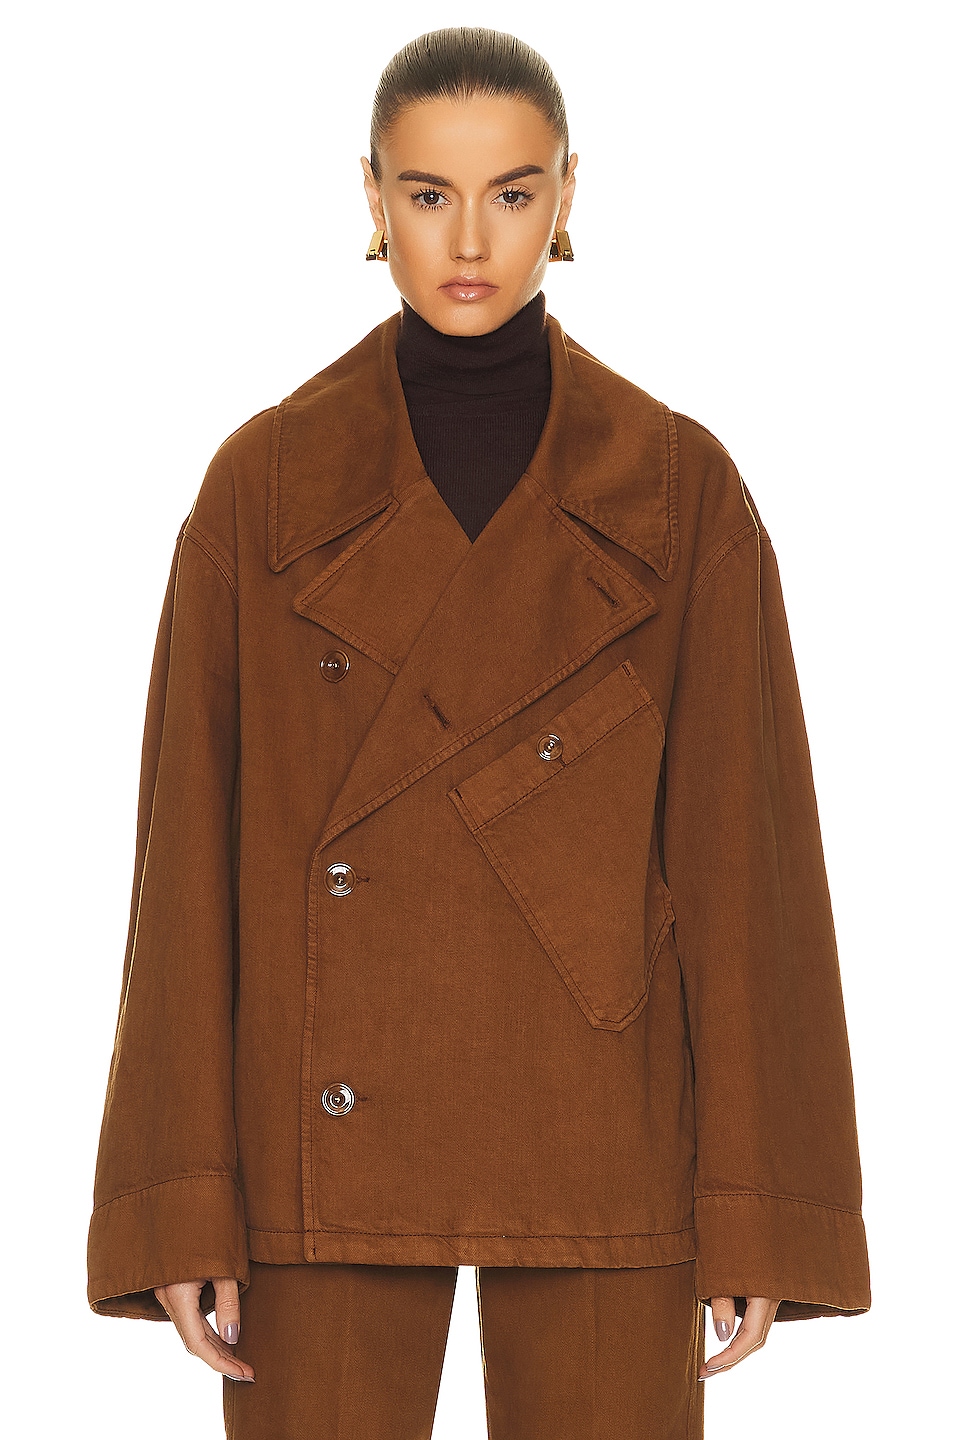 Lemaire Dispatch Jacket in Cigar | FWRD